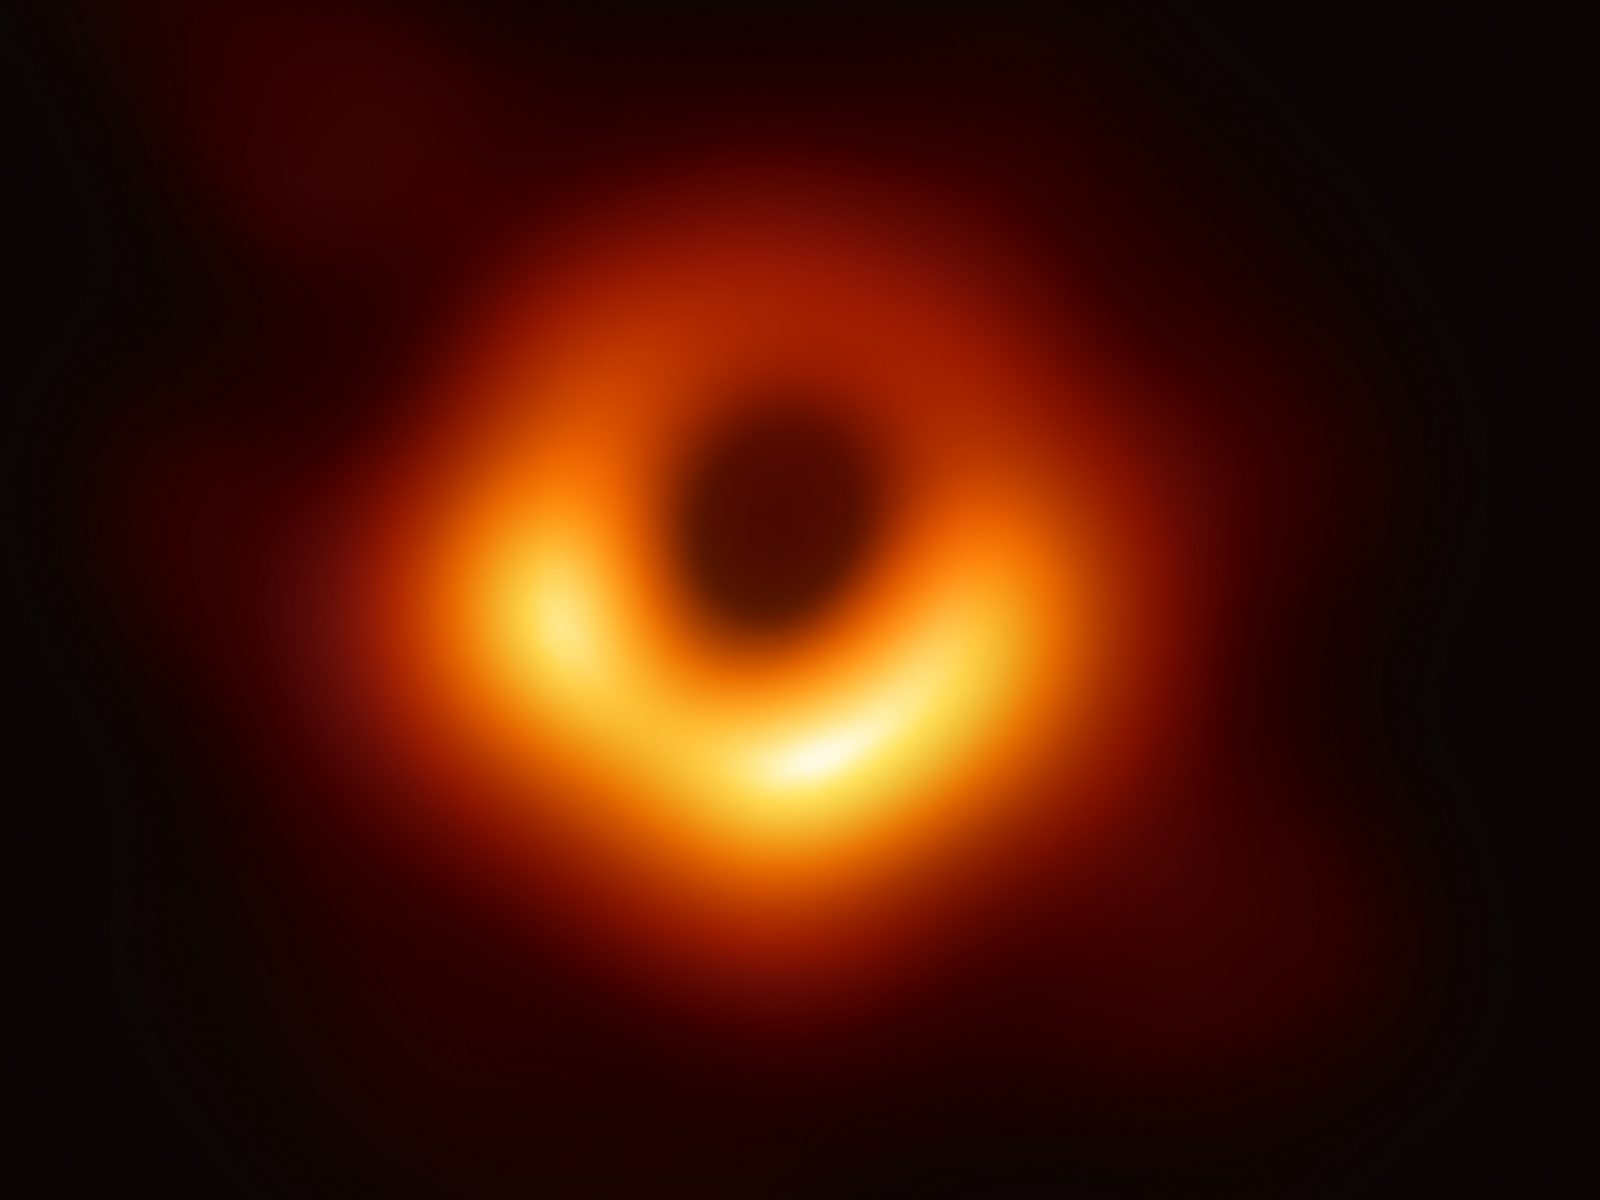 The first-ever image of a black hole was released Wednesday by a consortium of researchers, showing the 